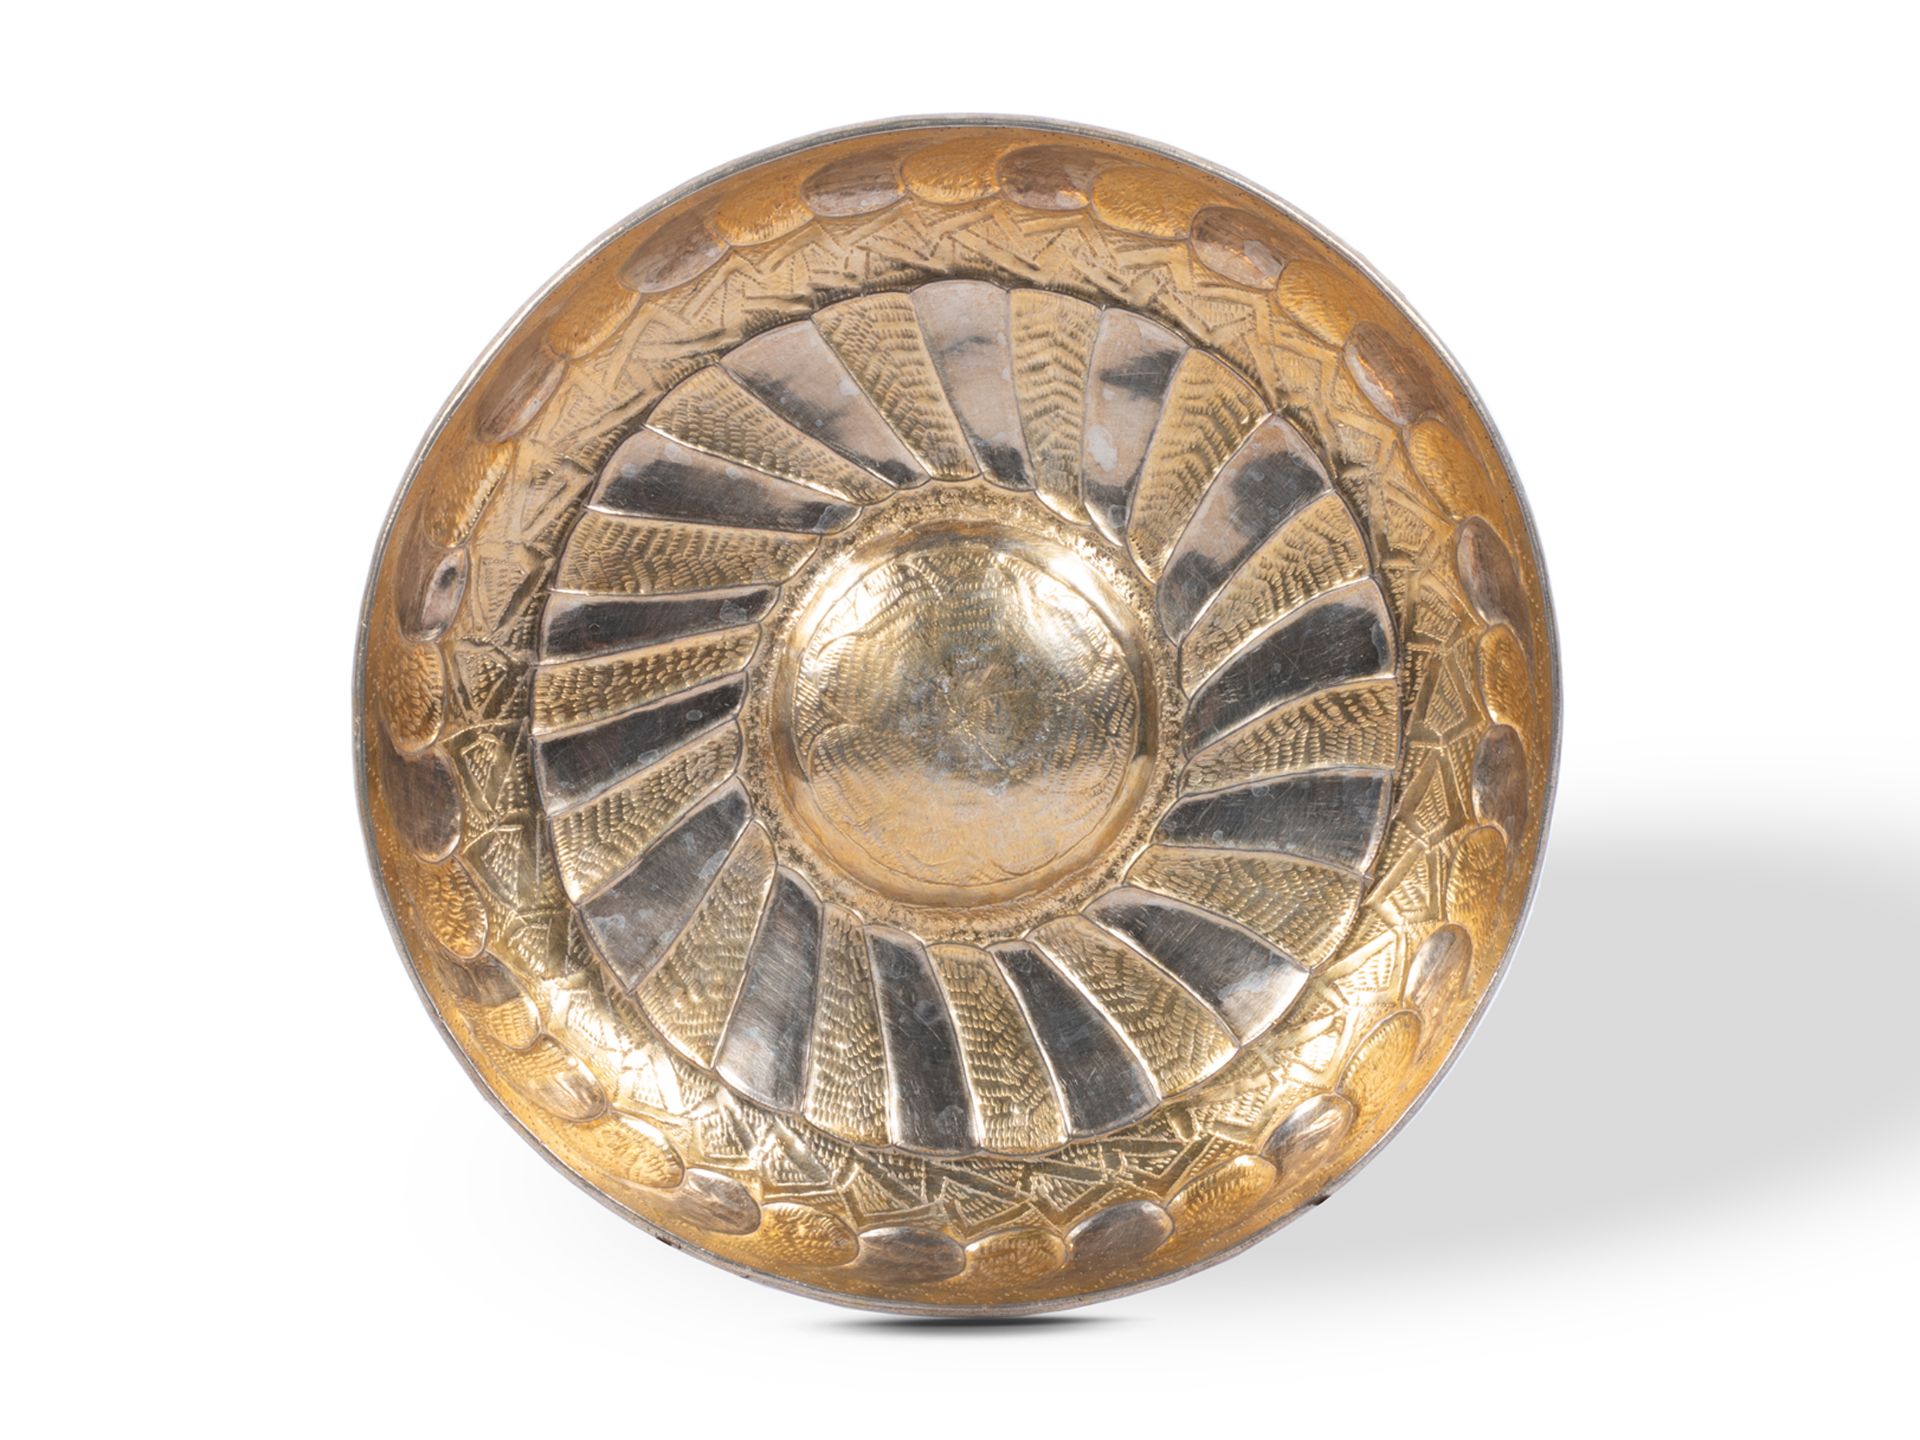 Ottoman silver bowl, Silver chased & gilded, 1st half 16th century